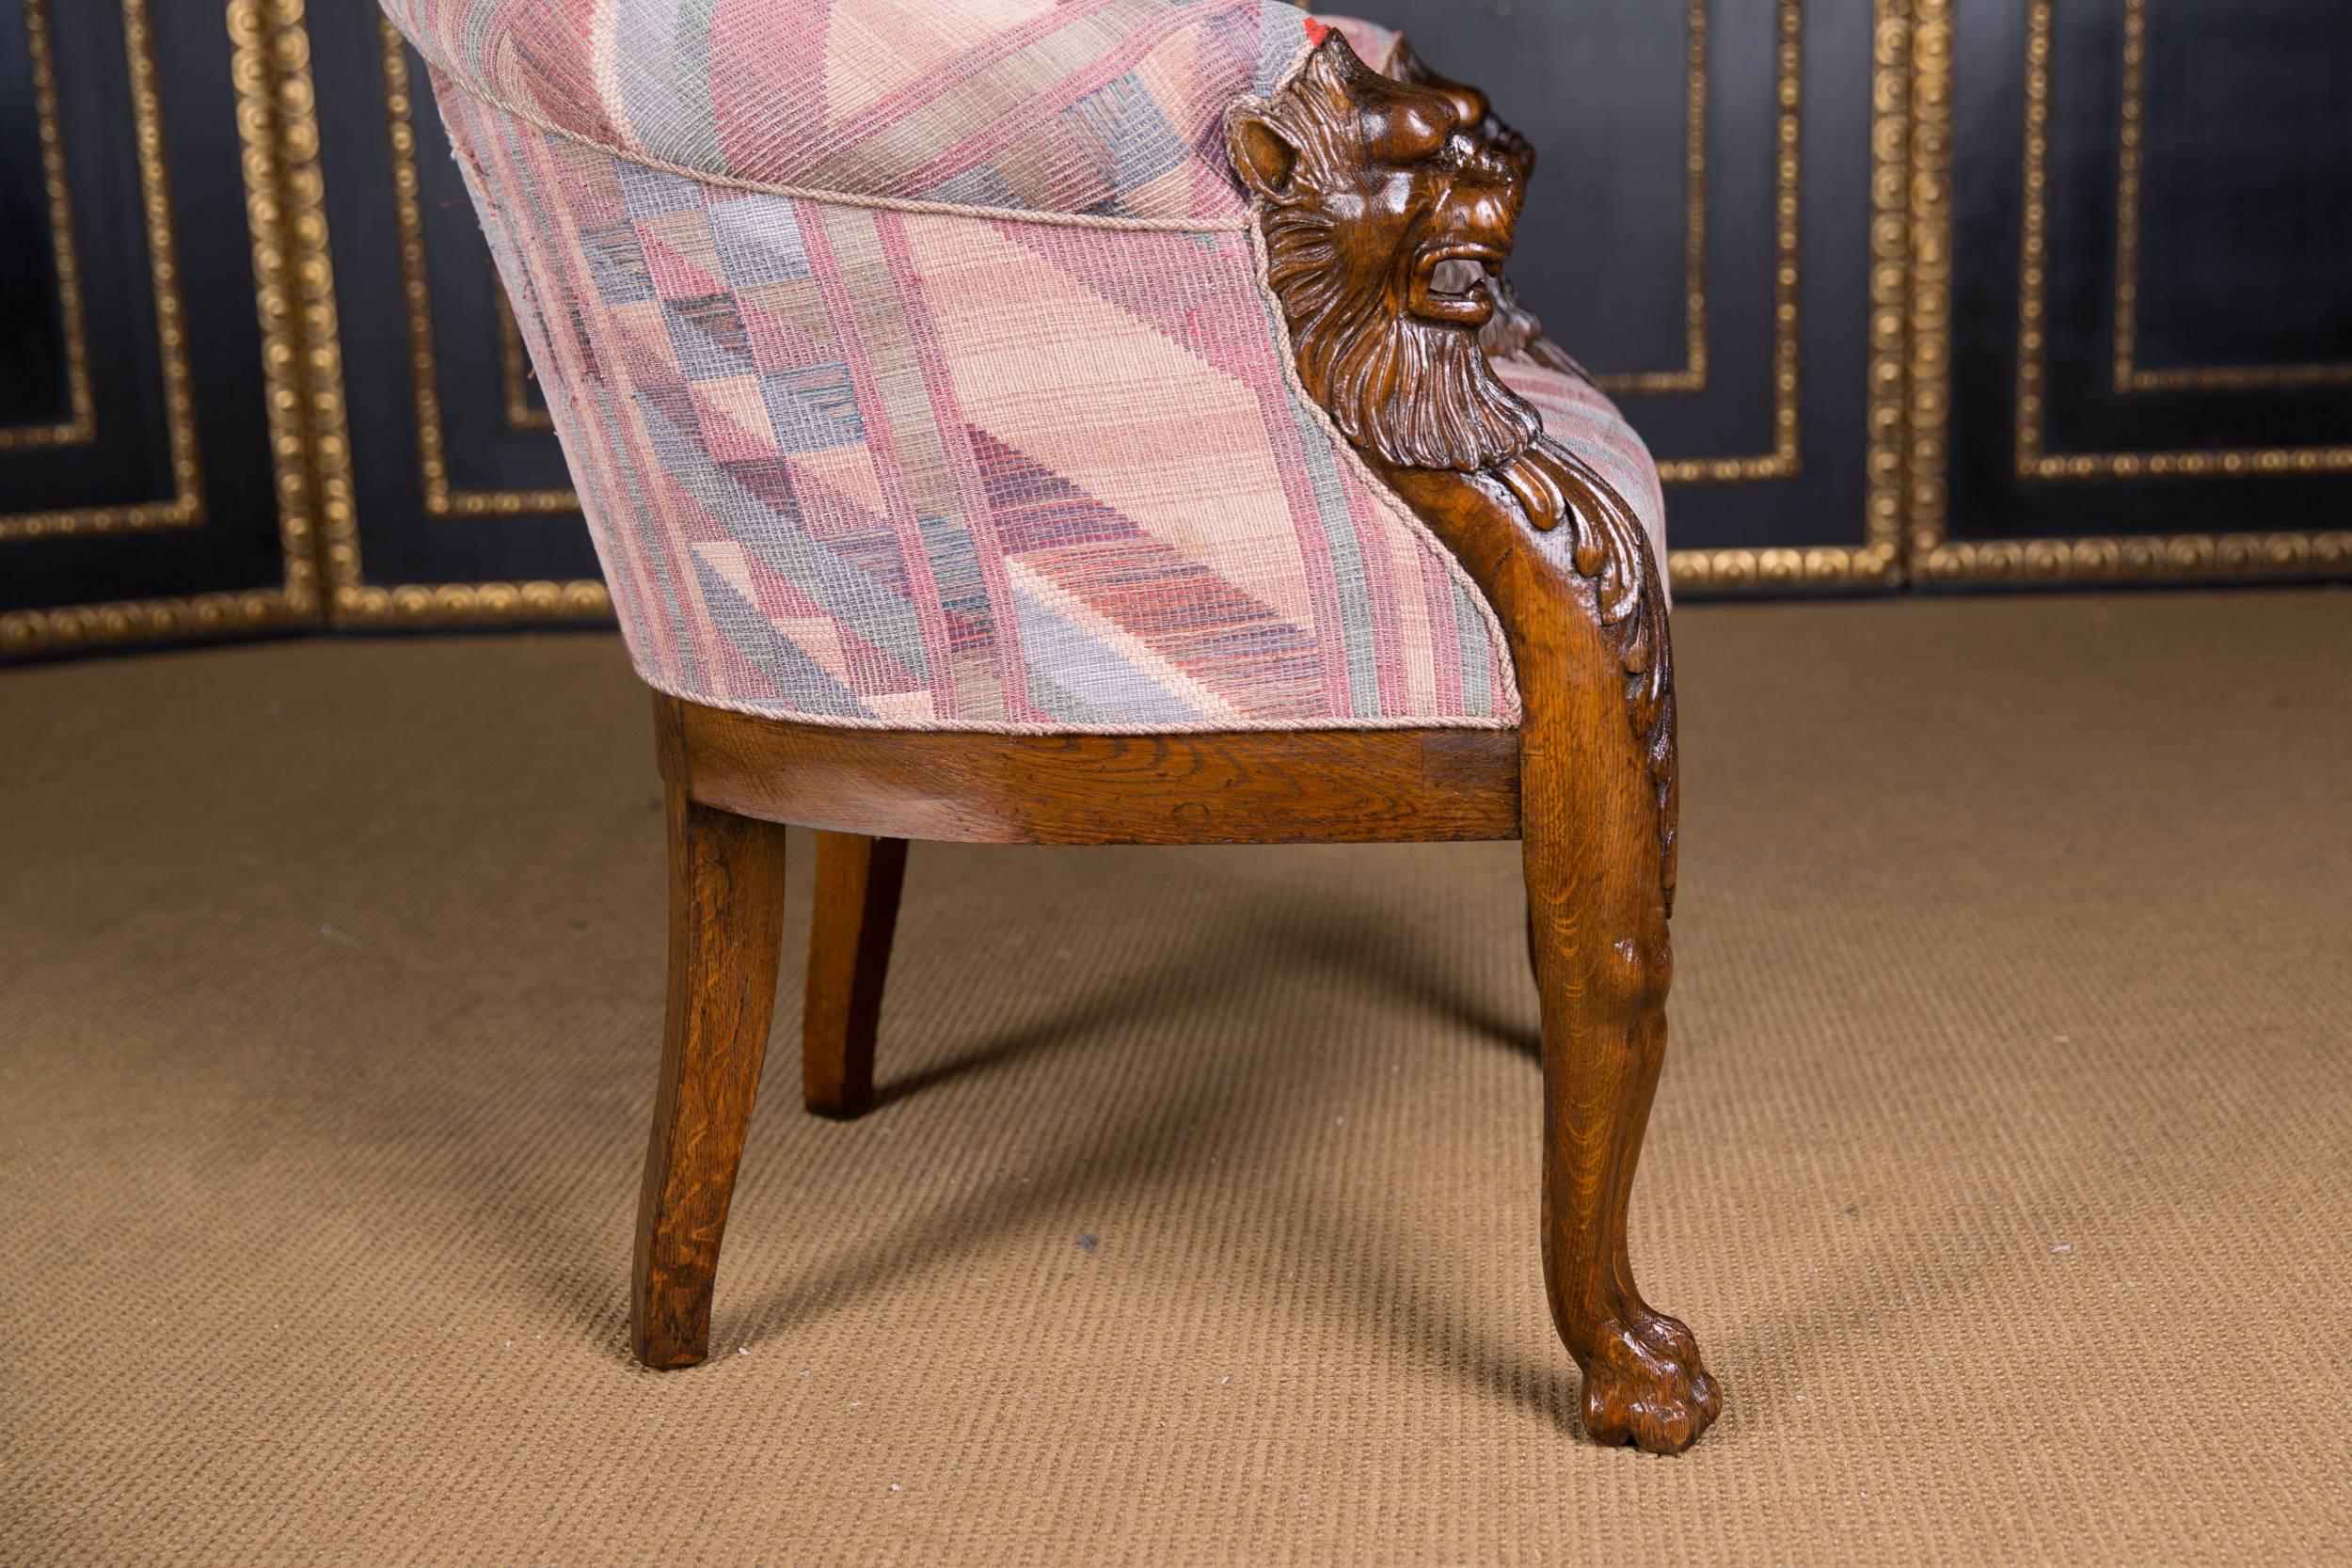 Hand-Carved 19th Century, Neo Renaissance Chair with Lion Head, circa 1850-1870